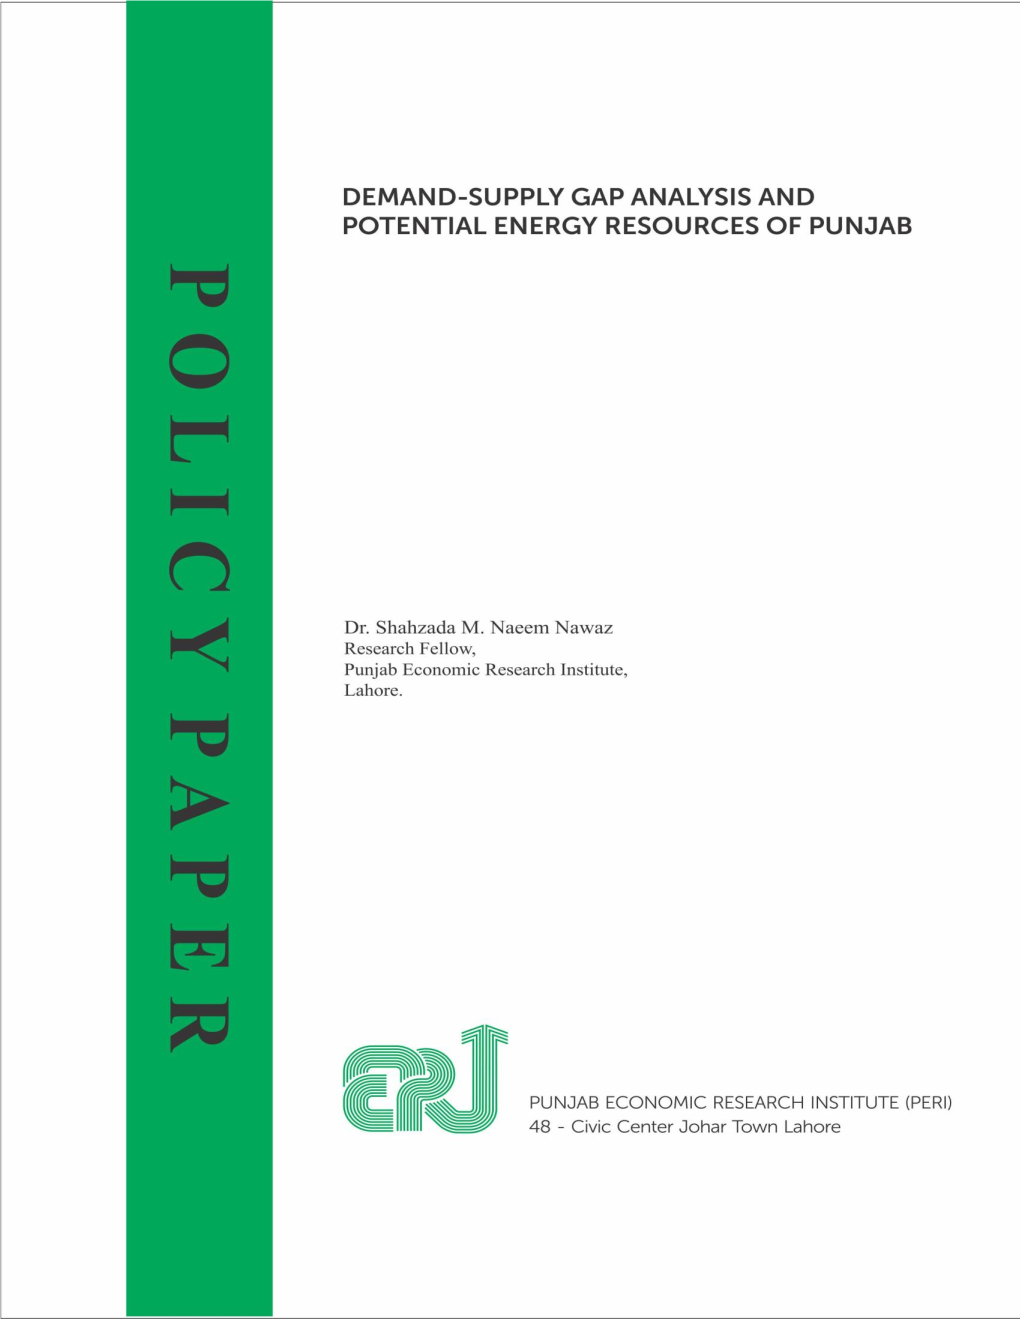 Demand-Supply Gap Analysis and Potential Energy Resources of Punjab Abstract